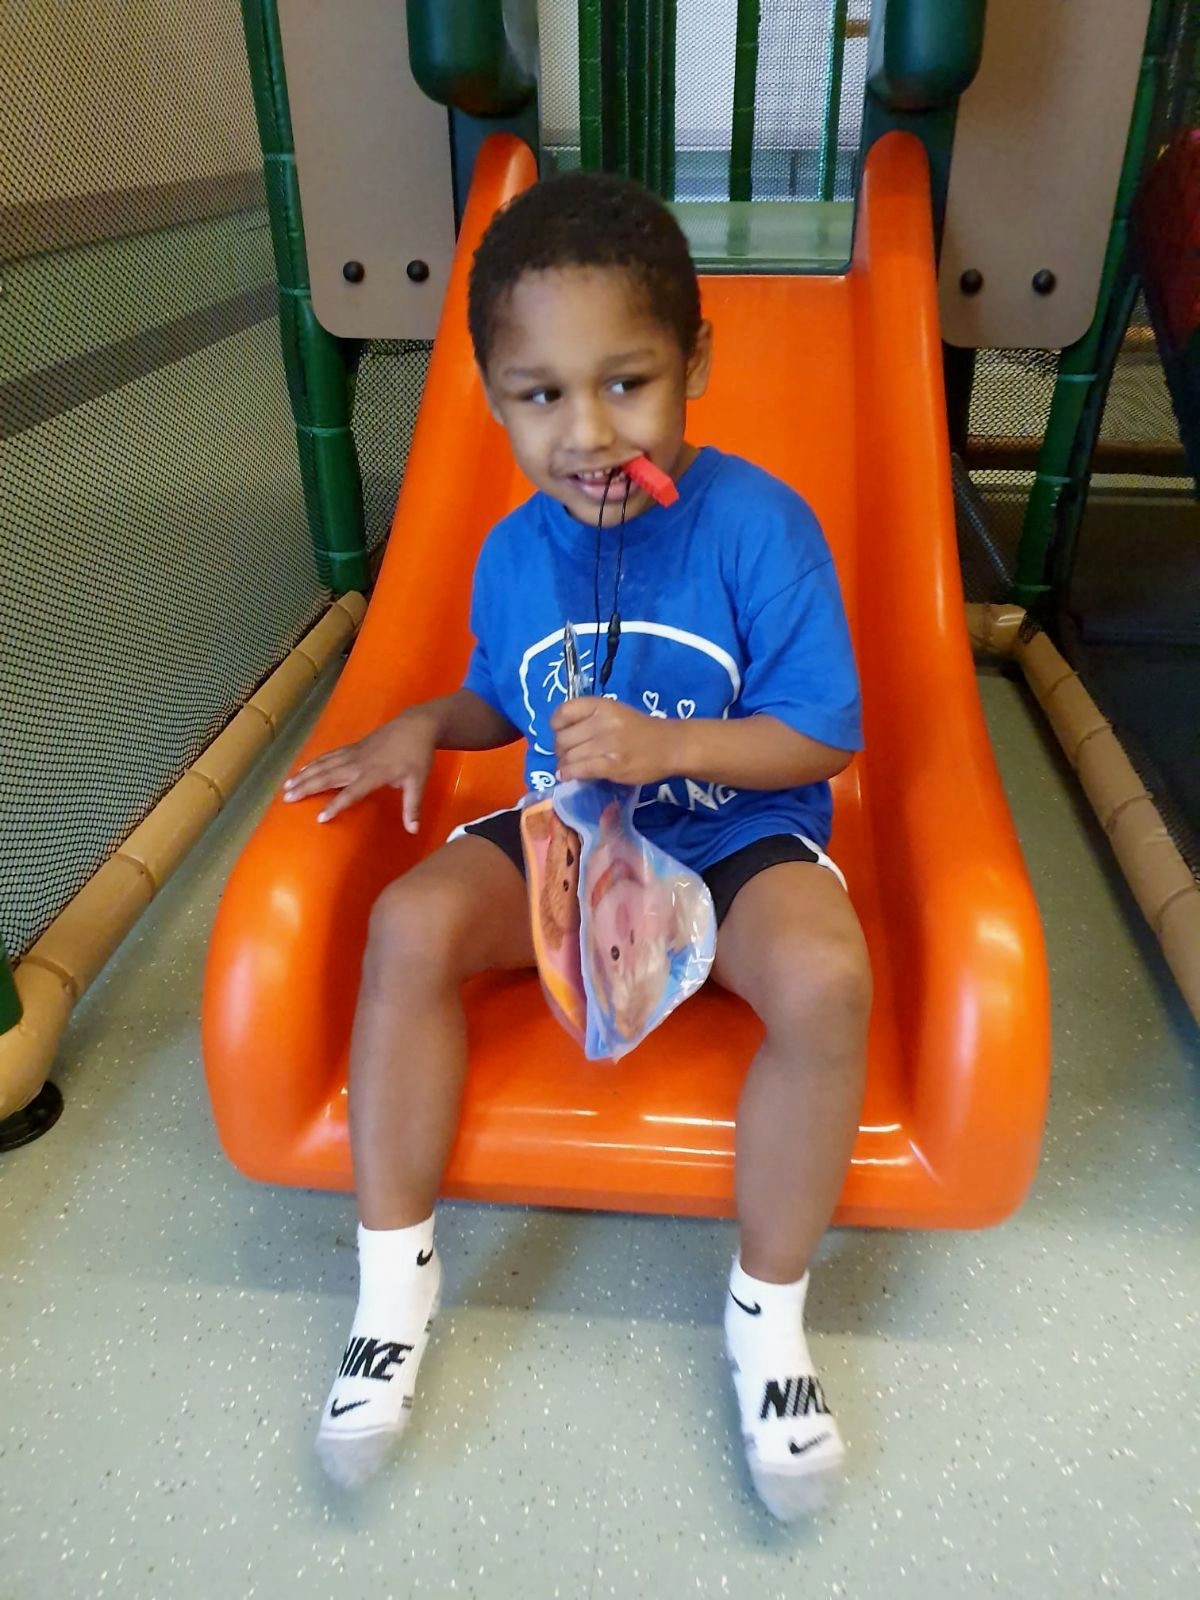 young smiling child wearing a blue t-shirt and dark blue shorts sits on an orange slide. He’s holding a plastic bag in his left hand and has a whistle in his mouth.